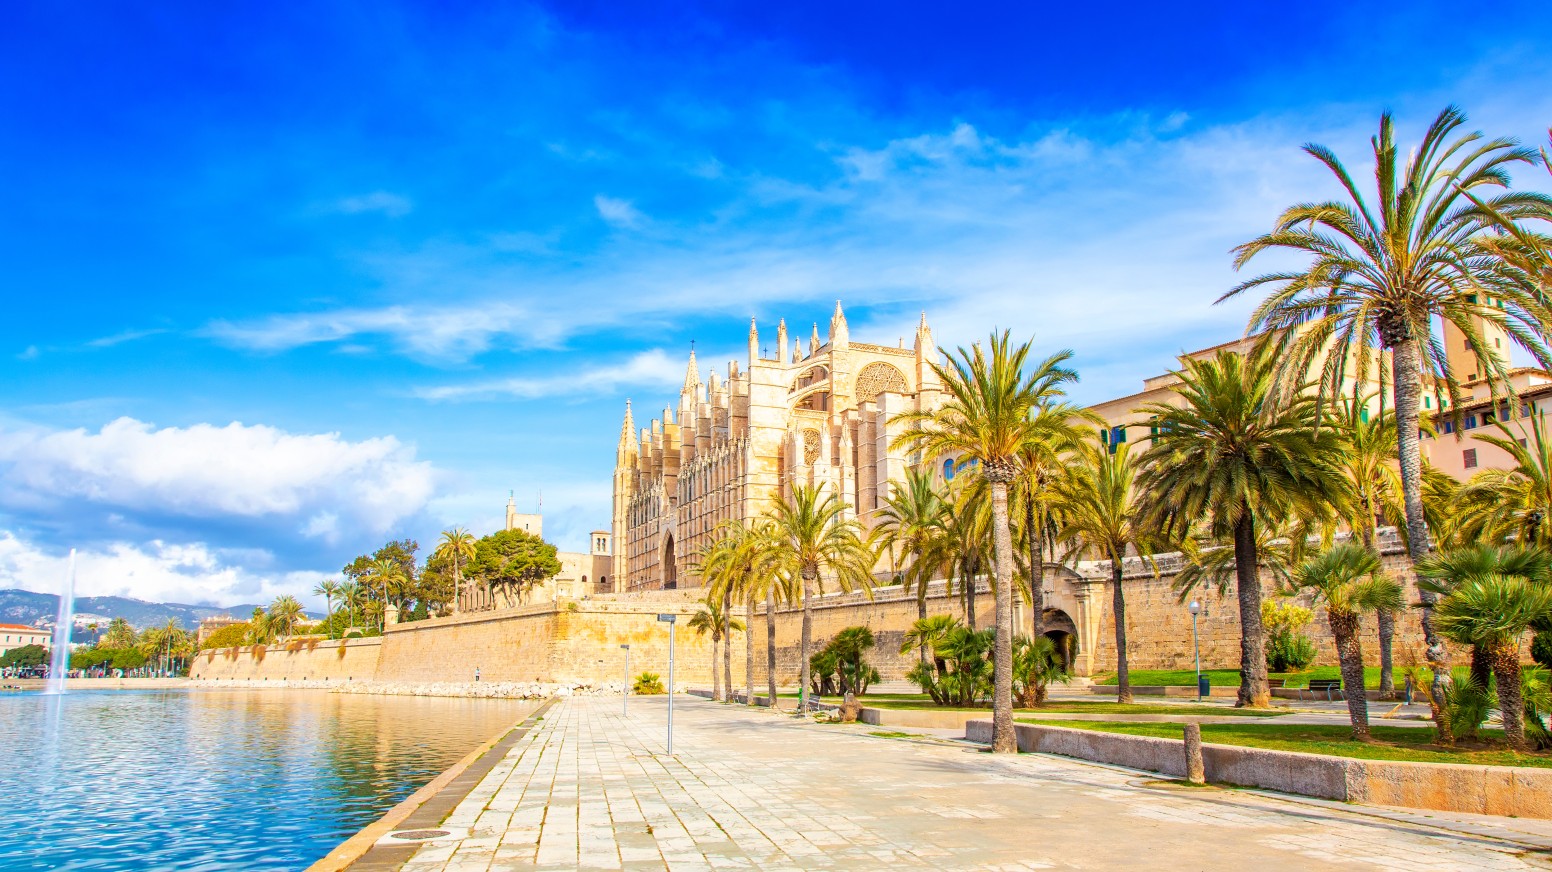 What to do in Palma?